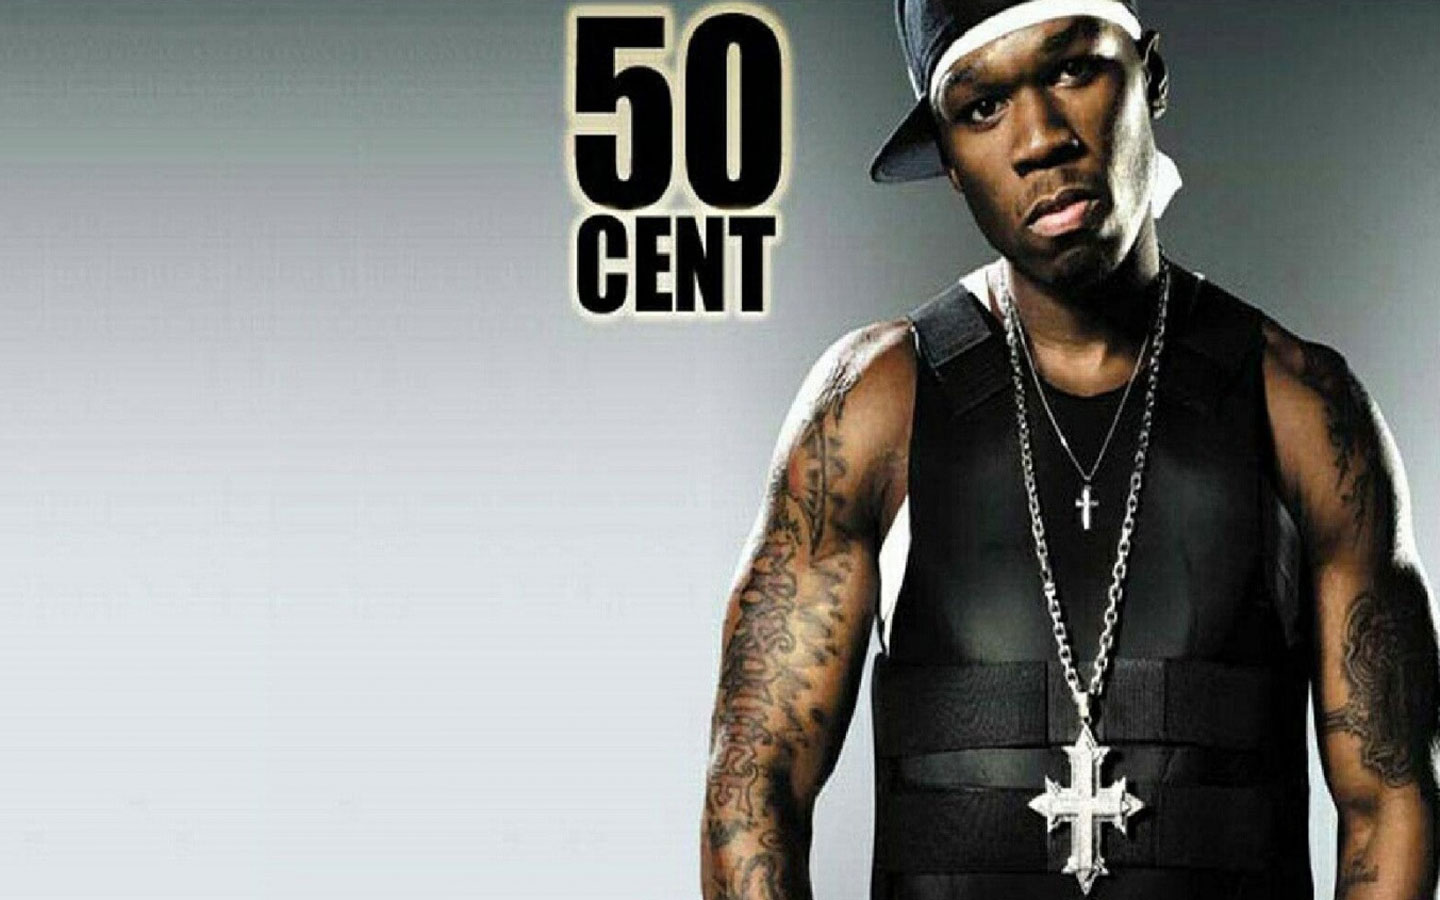 50 Cent Hd Wallpapers Hd Wallpapers - Removal 50 Cent Tattoos , HD Wallpaper & Backgrounds